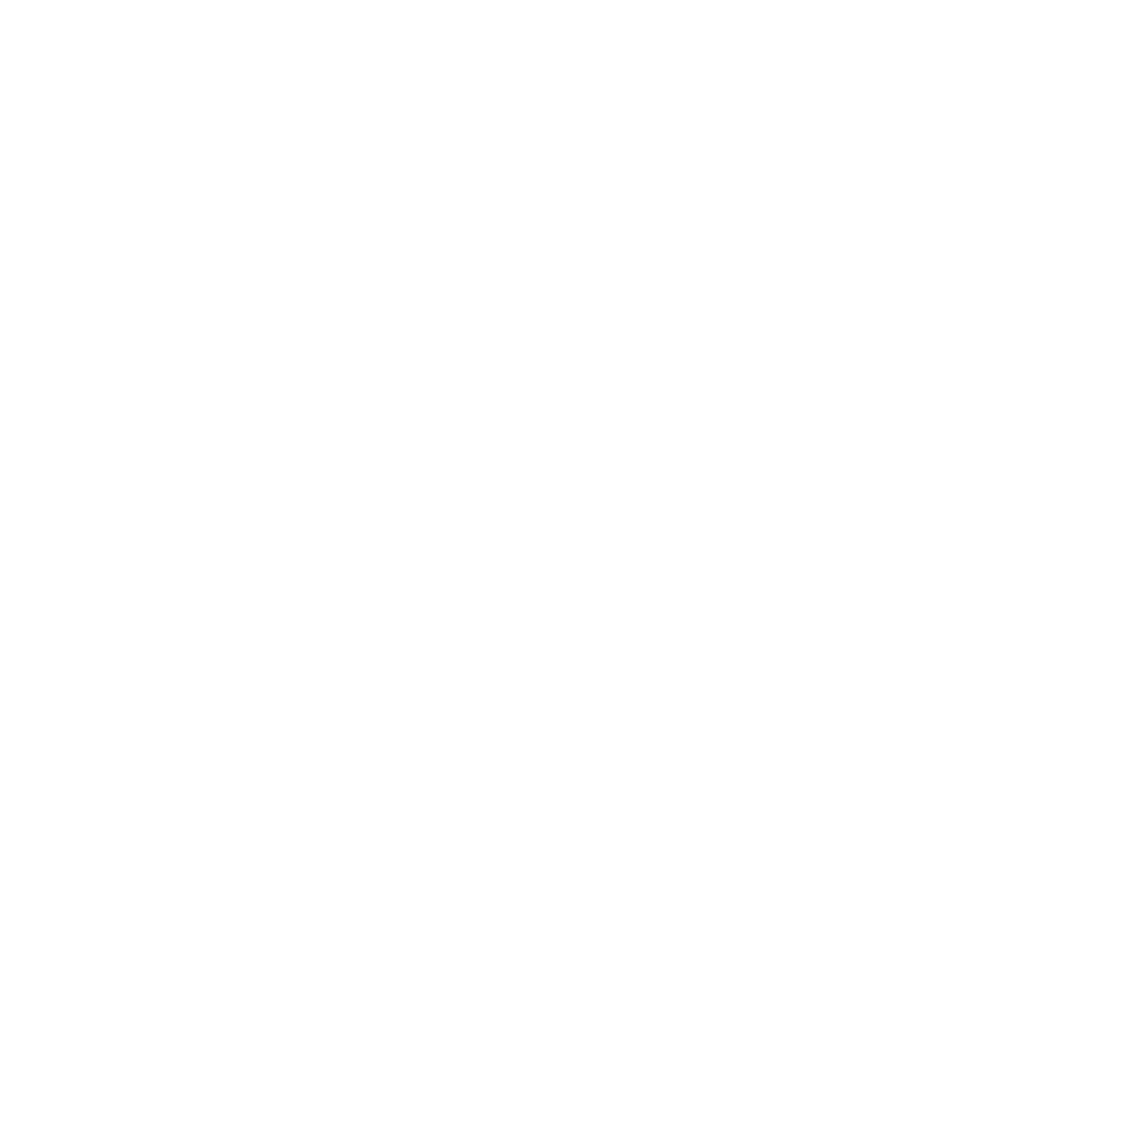 Email button